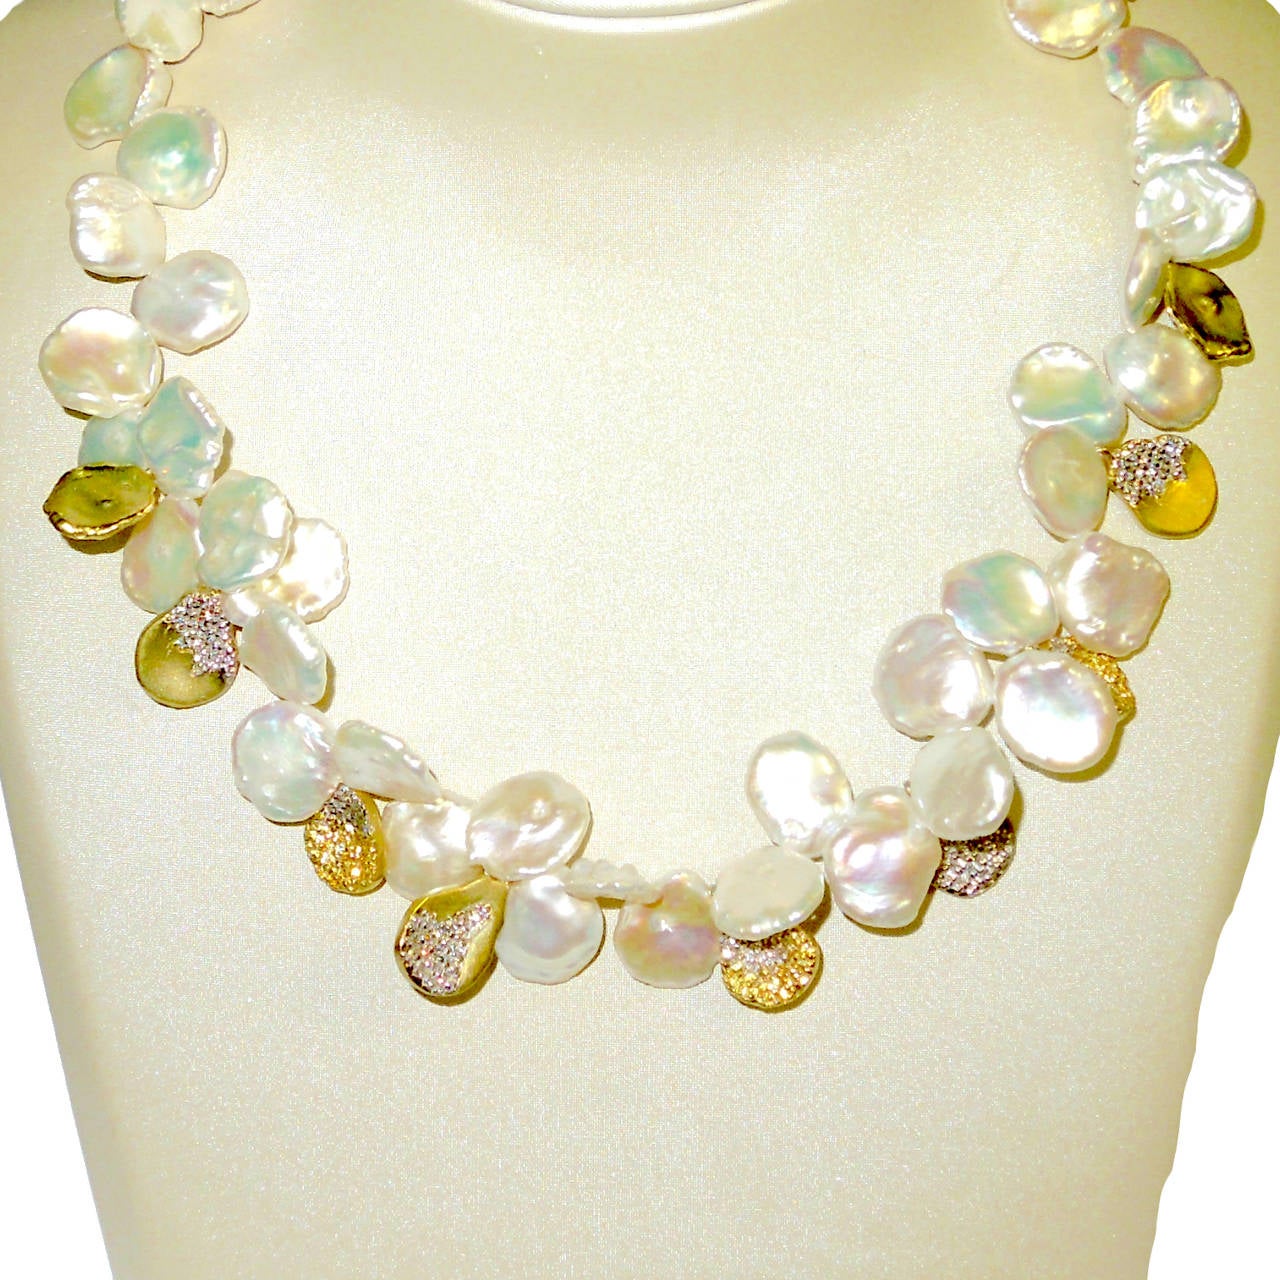 Kashi Pearl Necklace with 18K Gold Kashi pearl shapes with diamonds & yellow sapphires

2.01 ct.'s of G Color, VS Quality Diamonds

1.08 ct.'s of Yellow Sapphires

Stunning conversation piece

16 inches in length

Necklace is